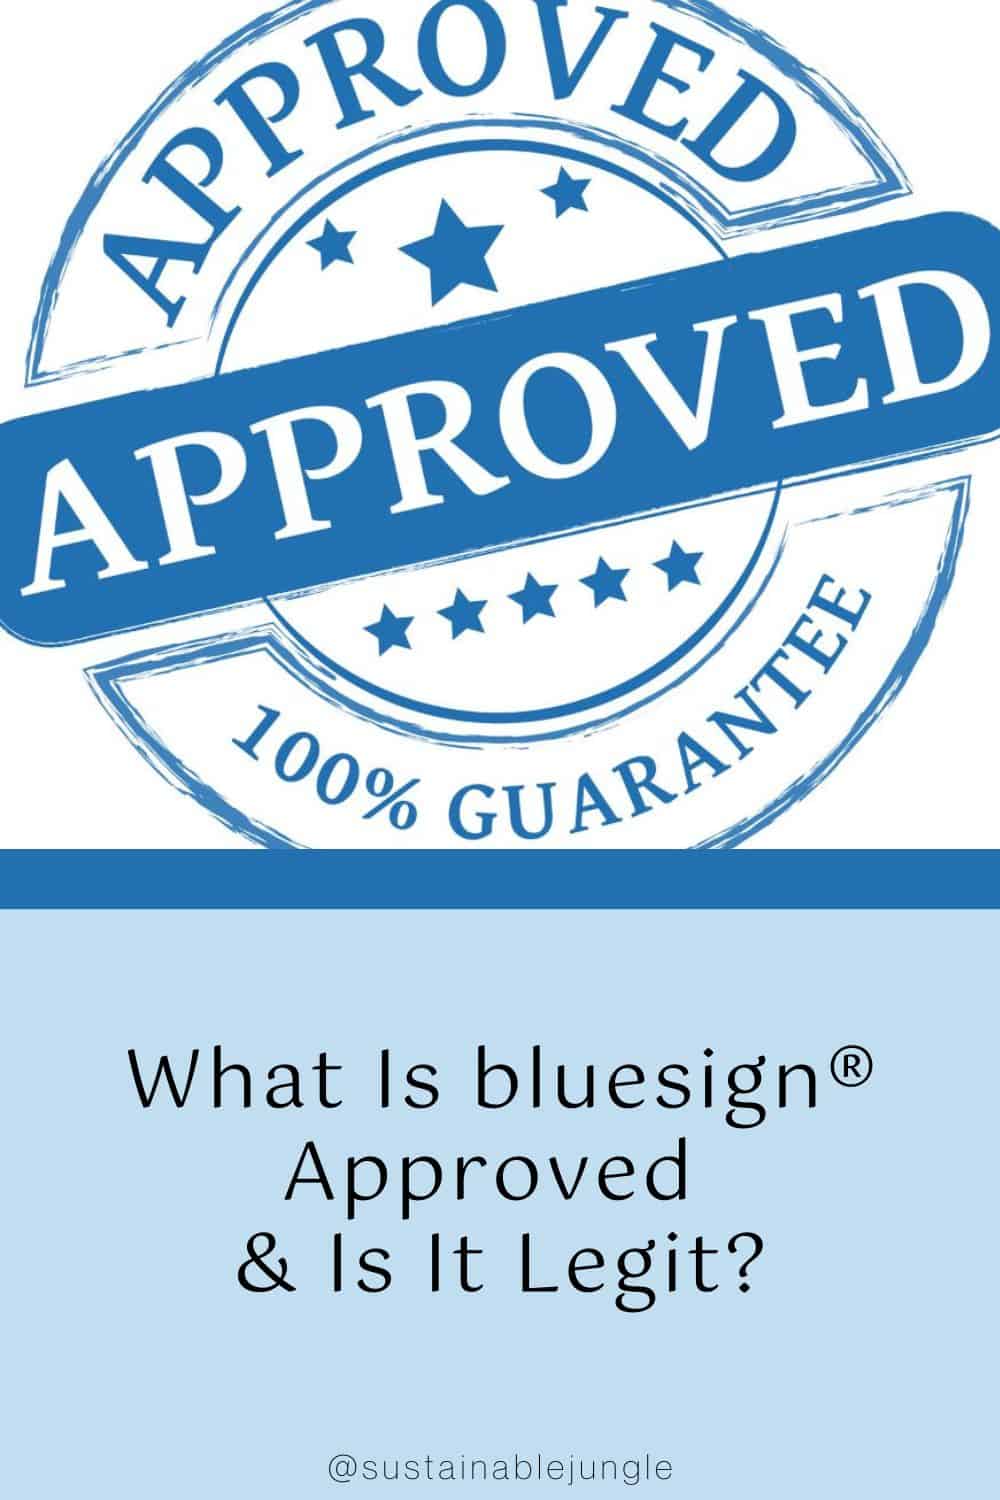 What Is bluesign® Approved & Is It Legit? Image by Violka08 #bluesignapproved #whatisbluesignapproved #bluesignapprovedfabric #bluesigncertified #whatisbluesigncertified #bluesigncertification #sustainablejungle